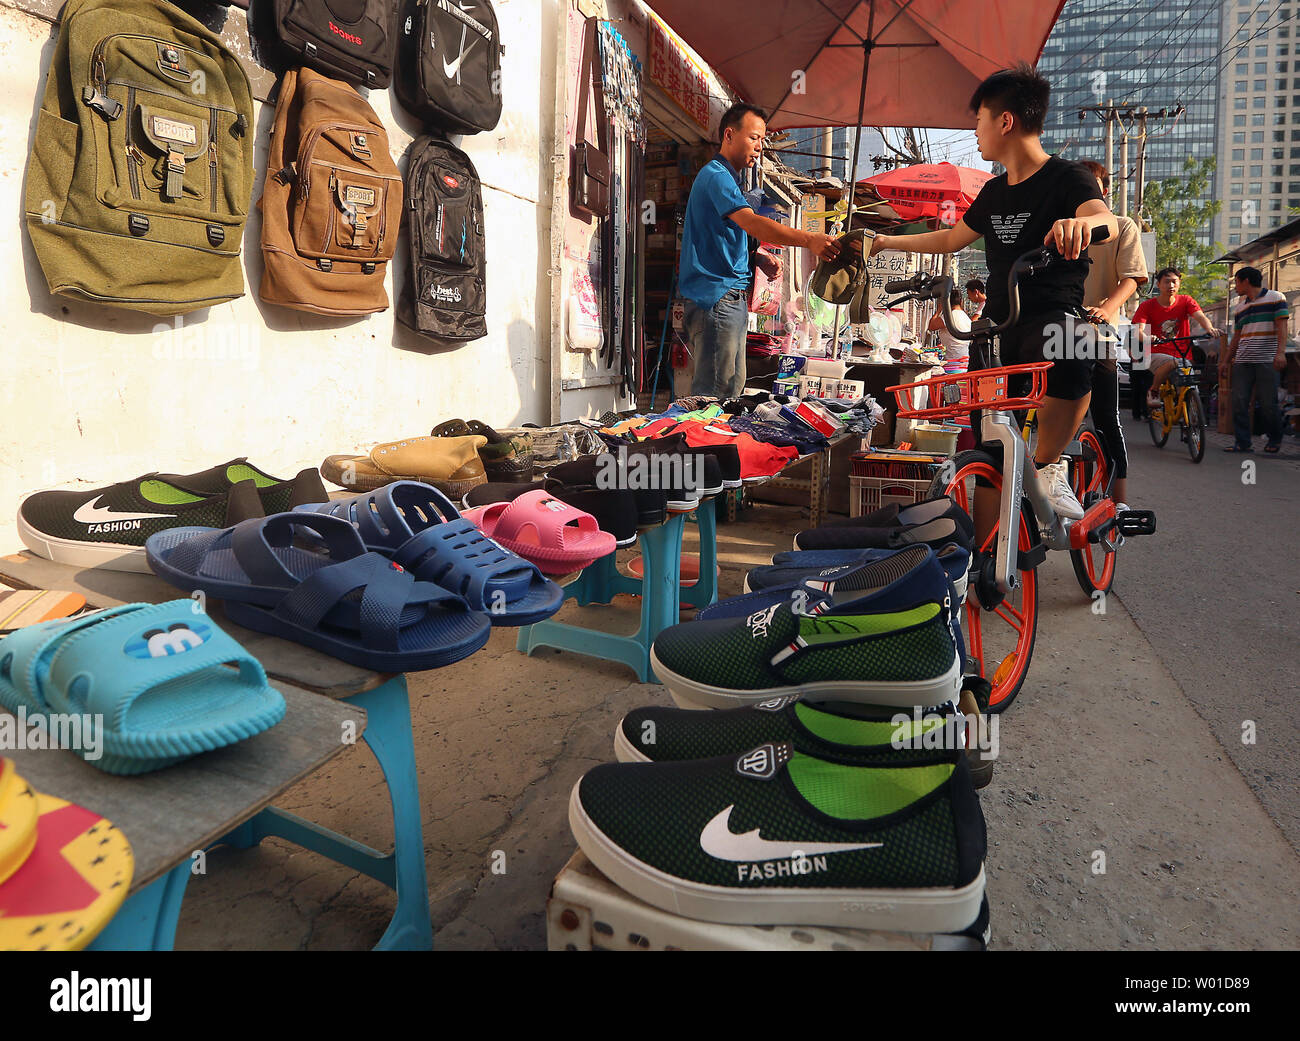 Fake Nike shoes and backpacks are sold in an alley in downtown Beijing on  July 30, 2017. International Property Rights (IPR) remain a thorny issue  with the U.S. government and China due